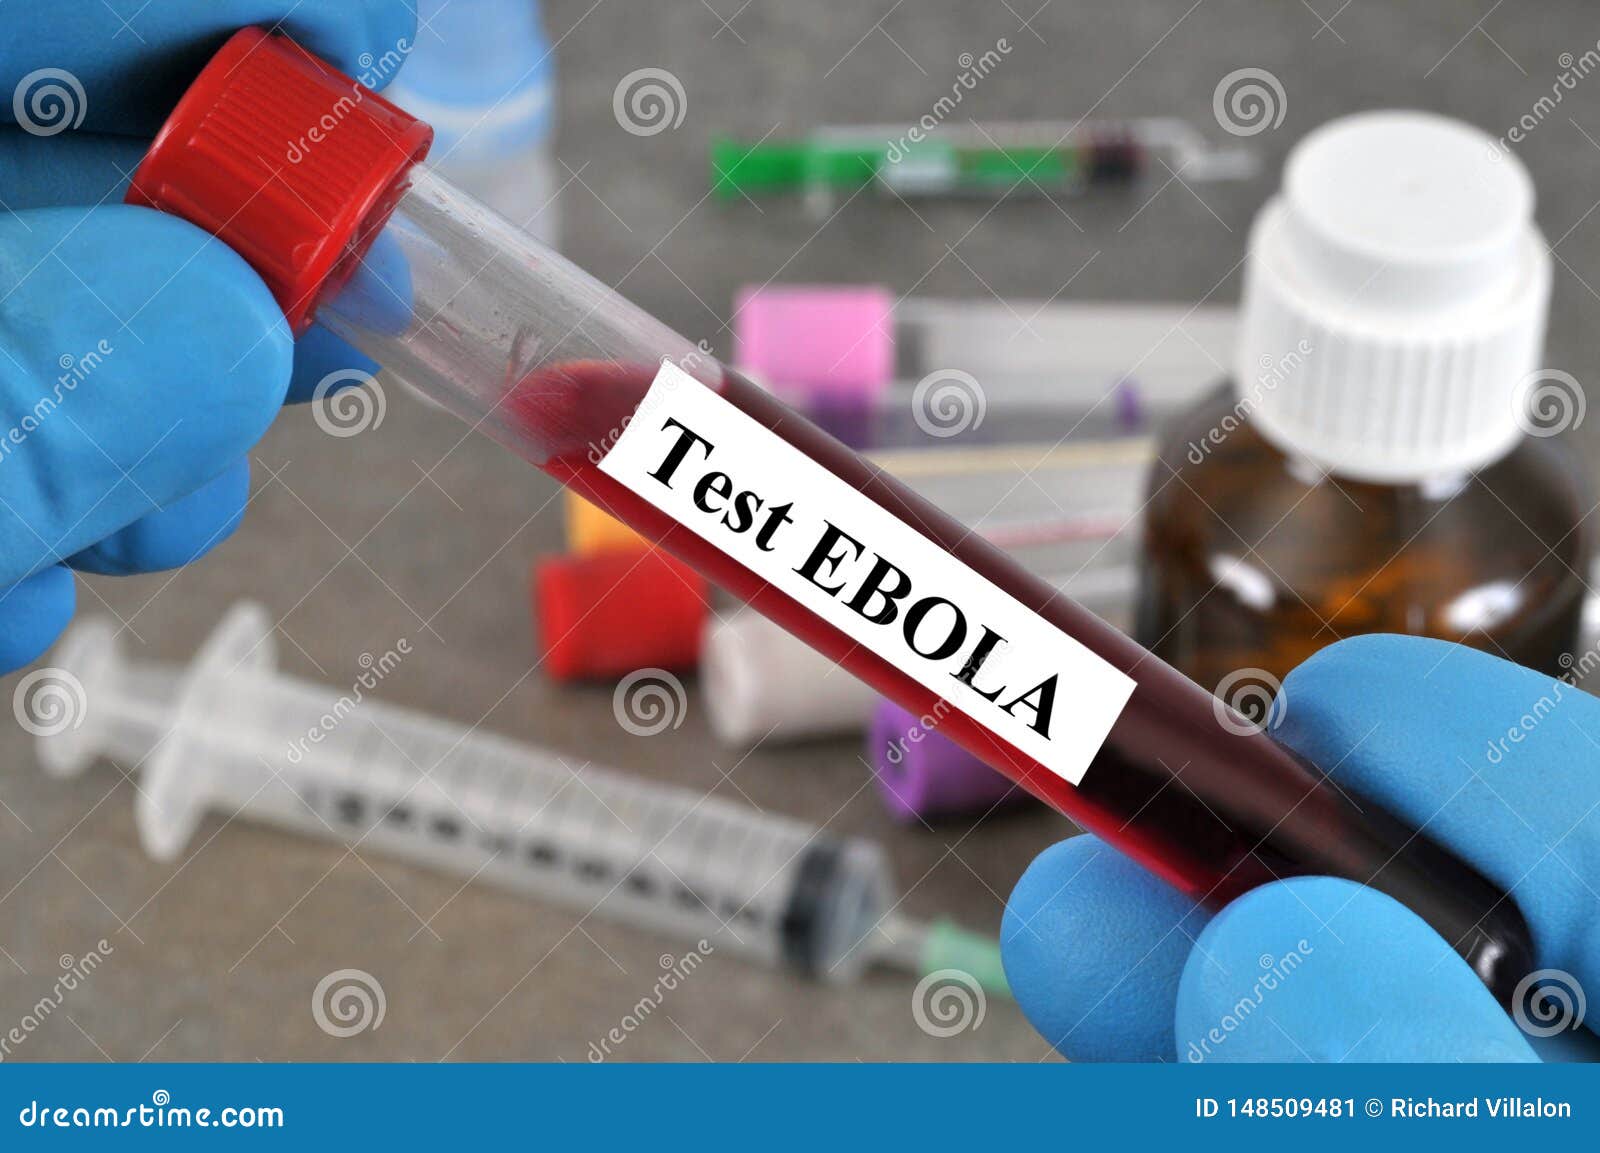 Ebola Virus Test In Close Up Stock Image Image Of Text Test 148509481